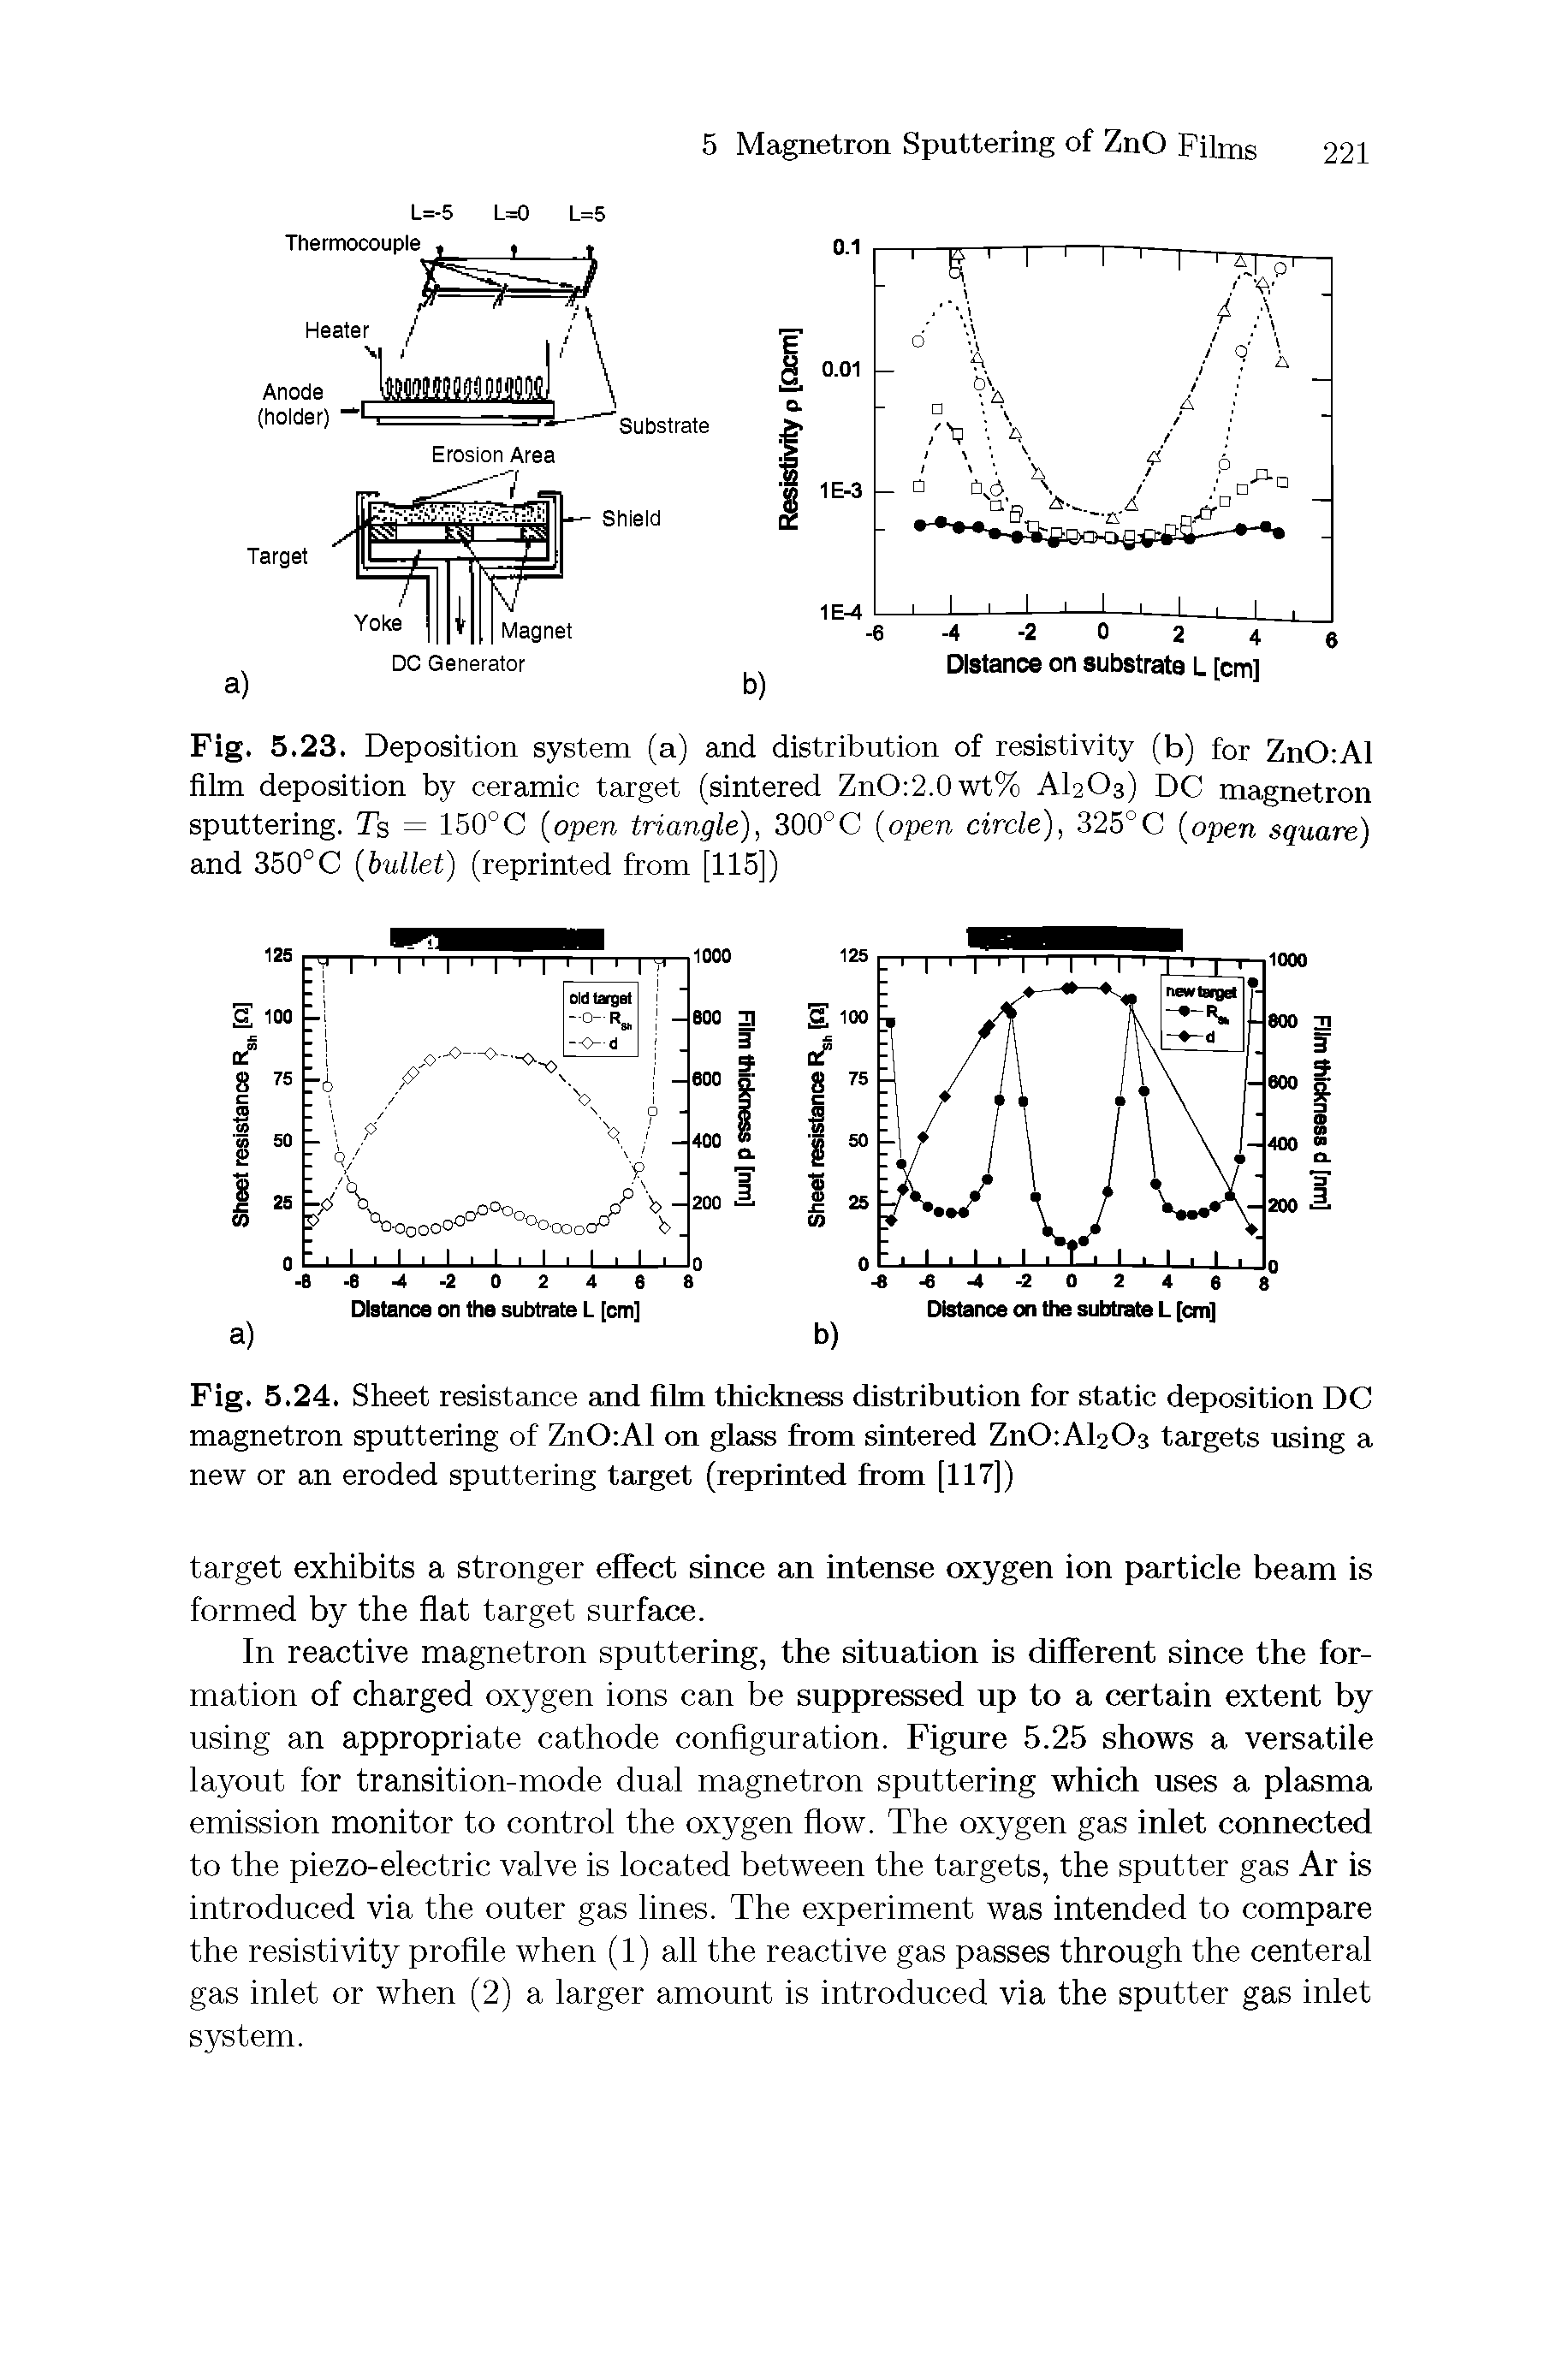 Fig. 5.24. Sheet resistance and film thickness distribution for static deposition DC magnetron sputtering of ZnO Al on glass from sintered ZnO A I2O3 targets using a new or an eroded sputtering target (reprinted from [117])...